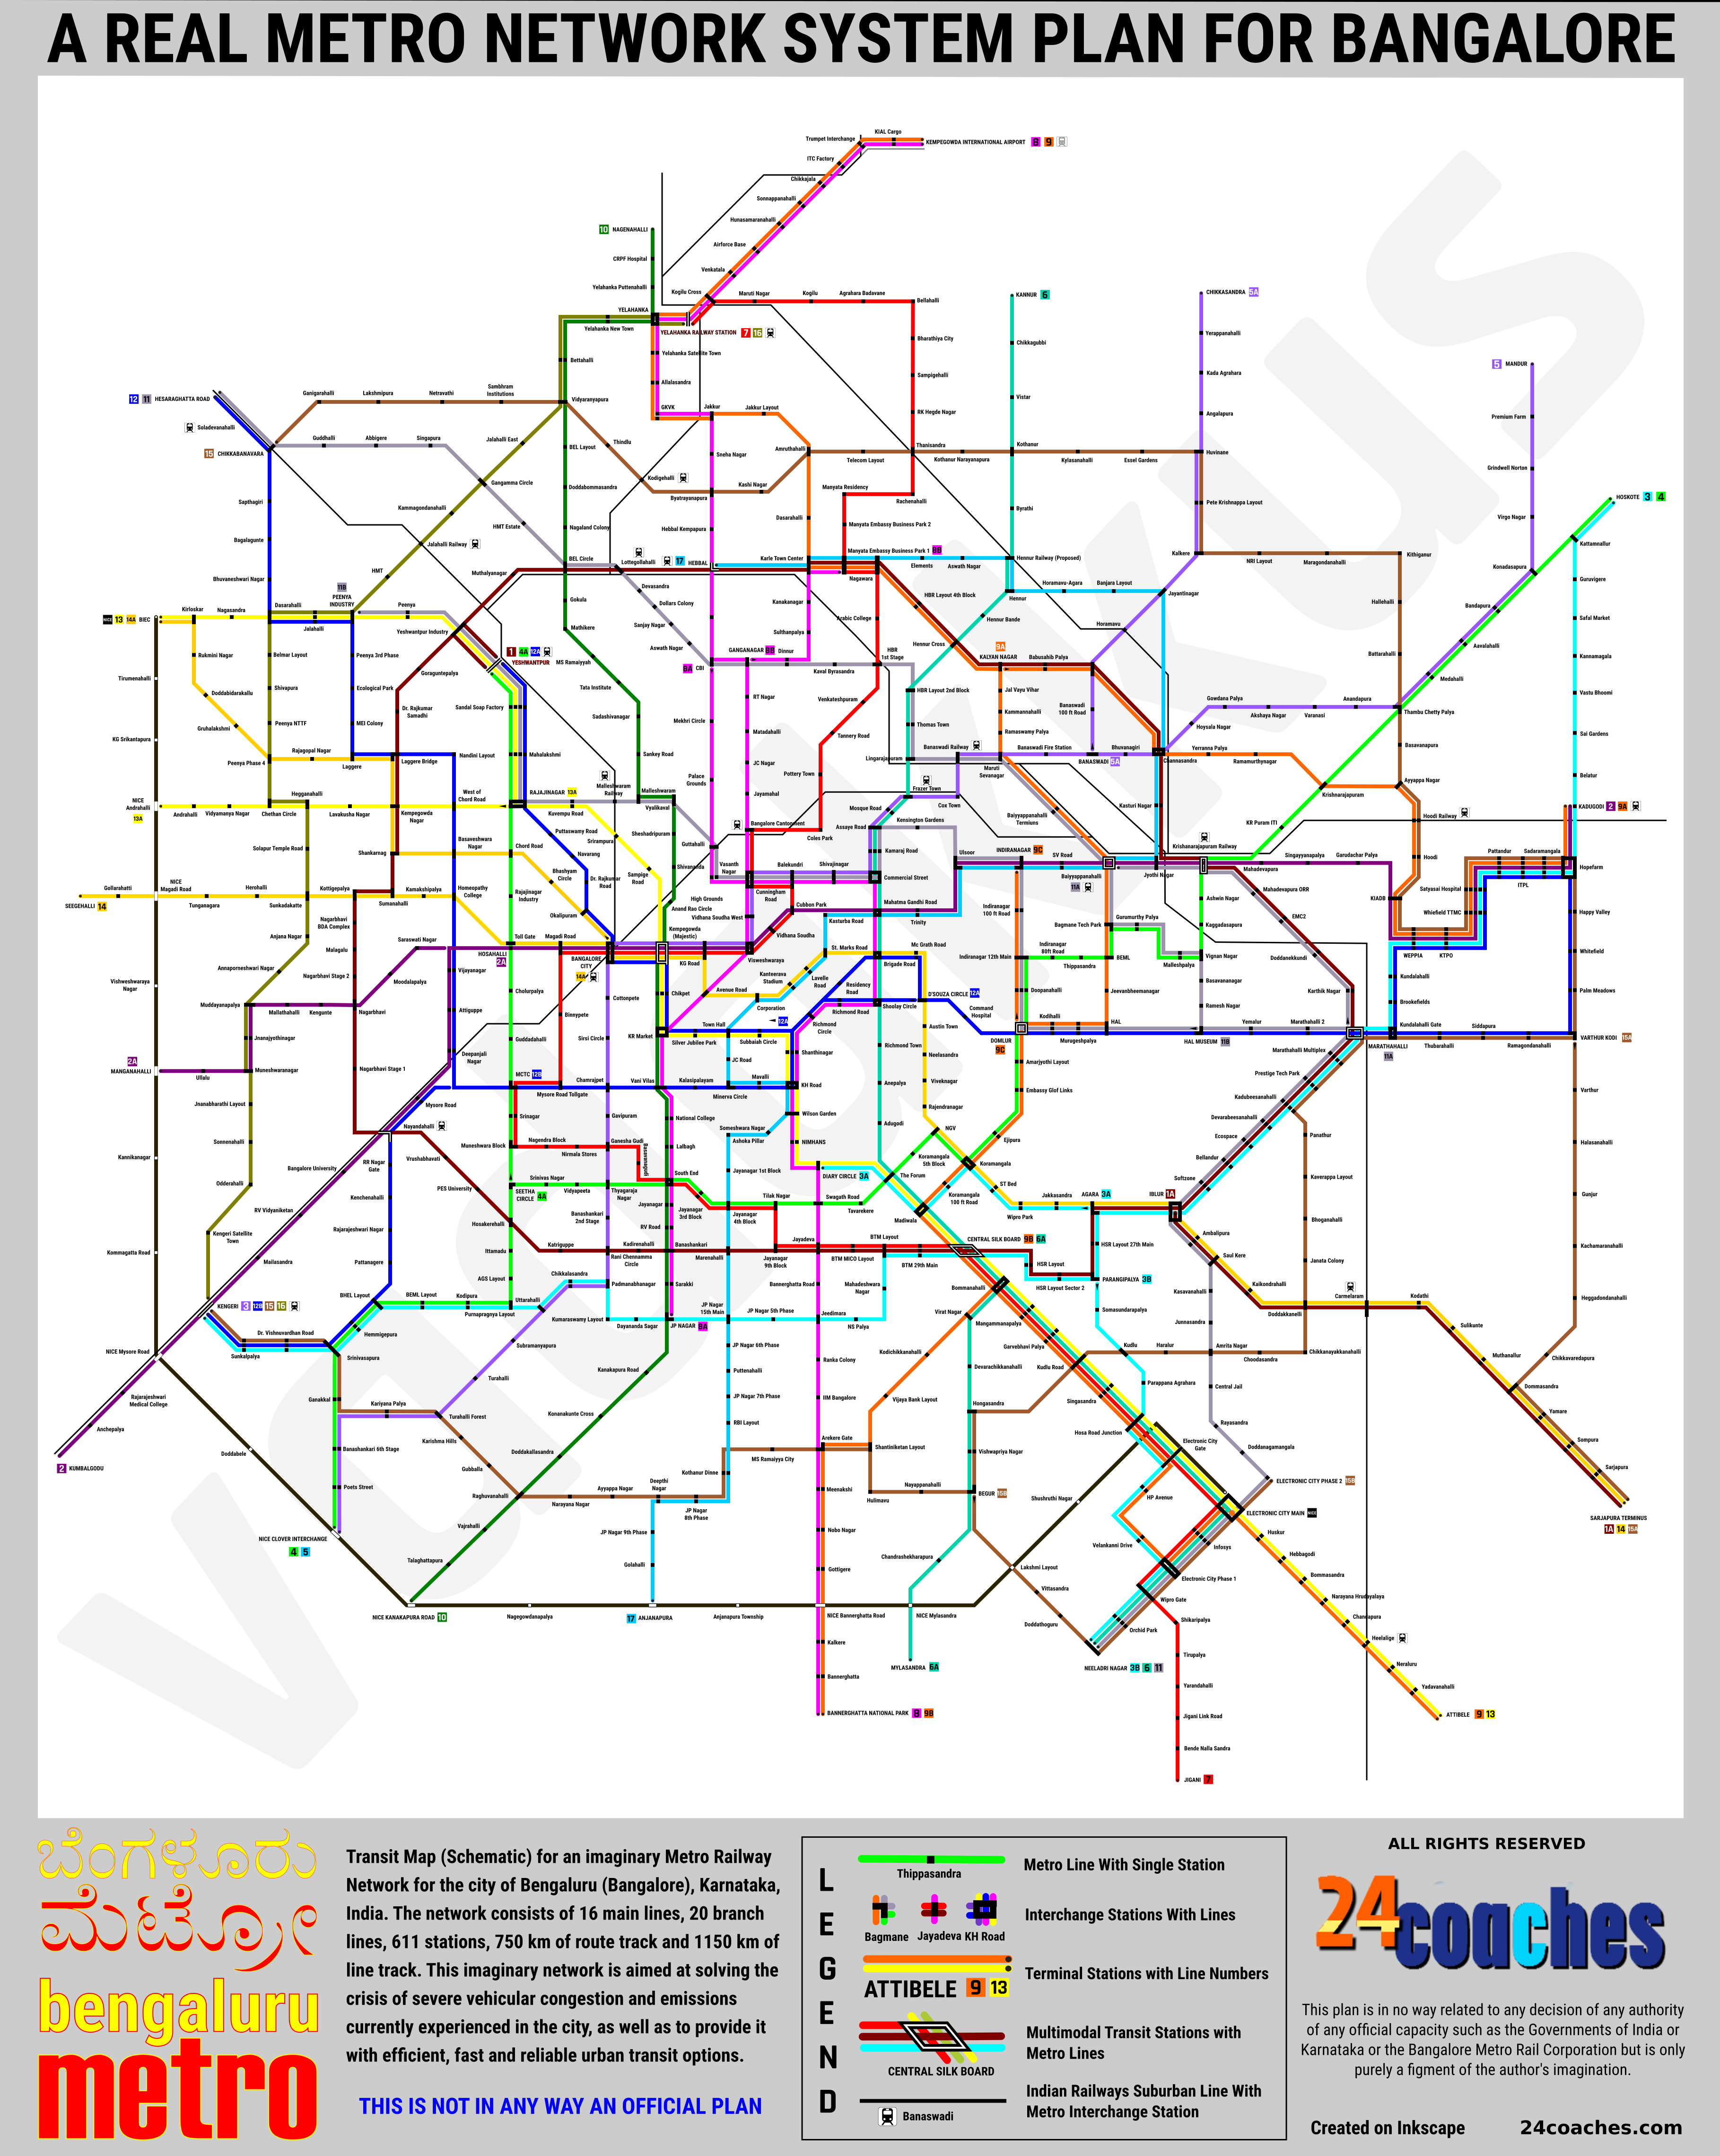 A network plan and (schematic) transit map for an imaginary comprehensive Metro network for Bangalore, India